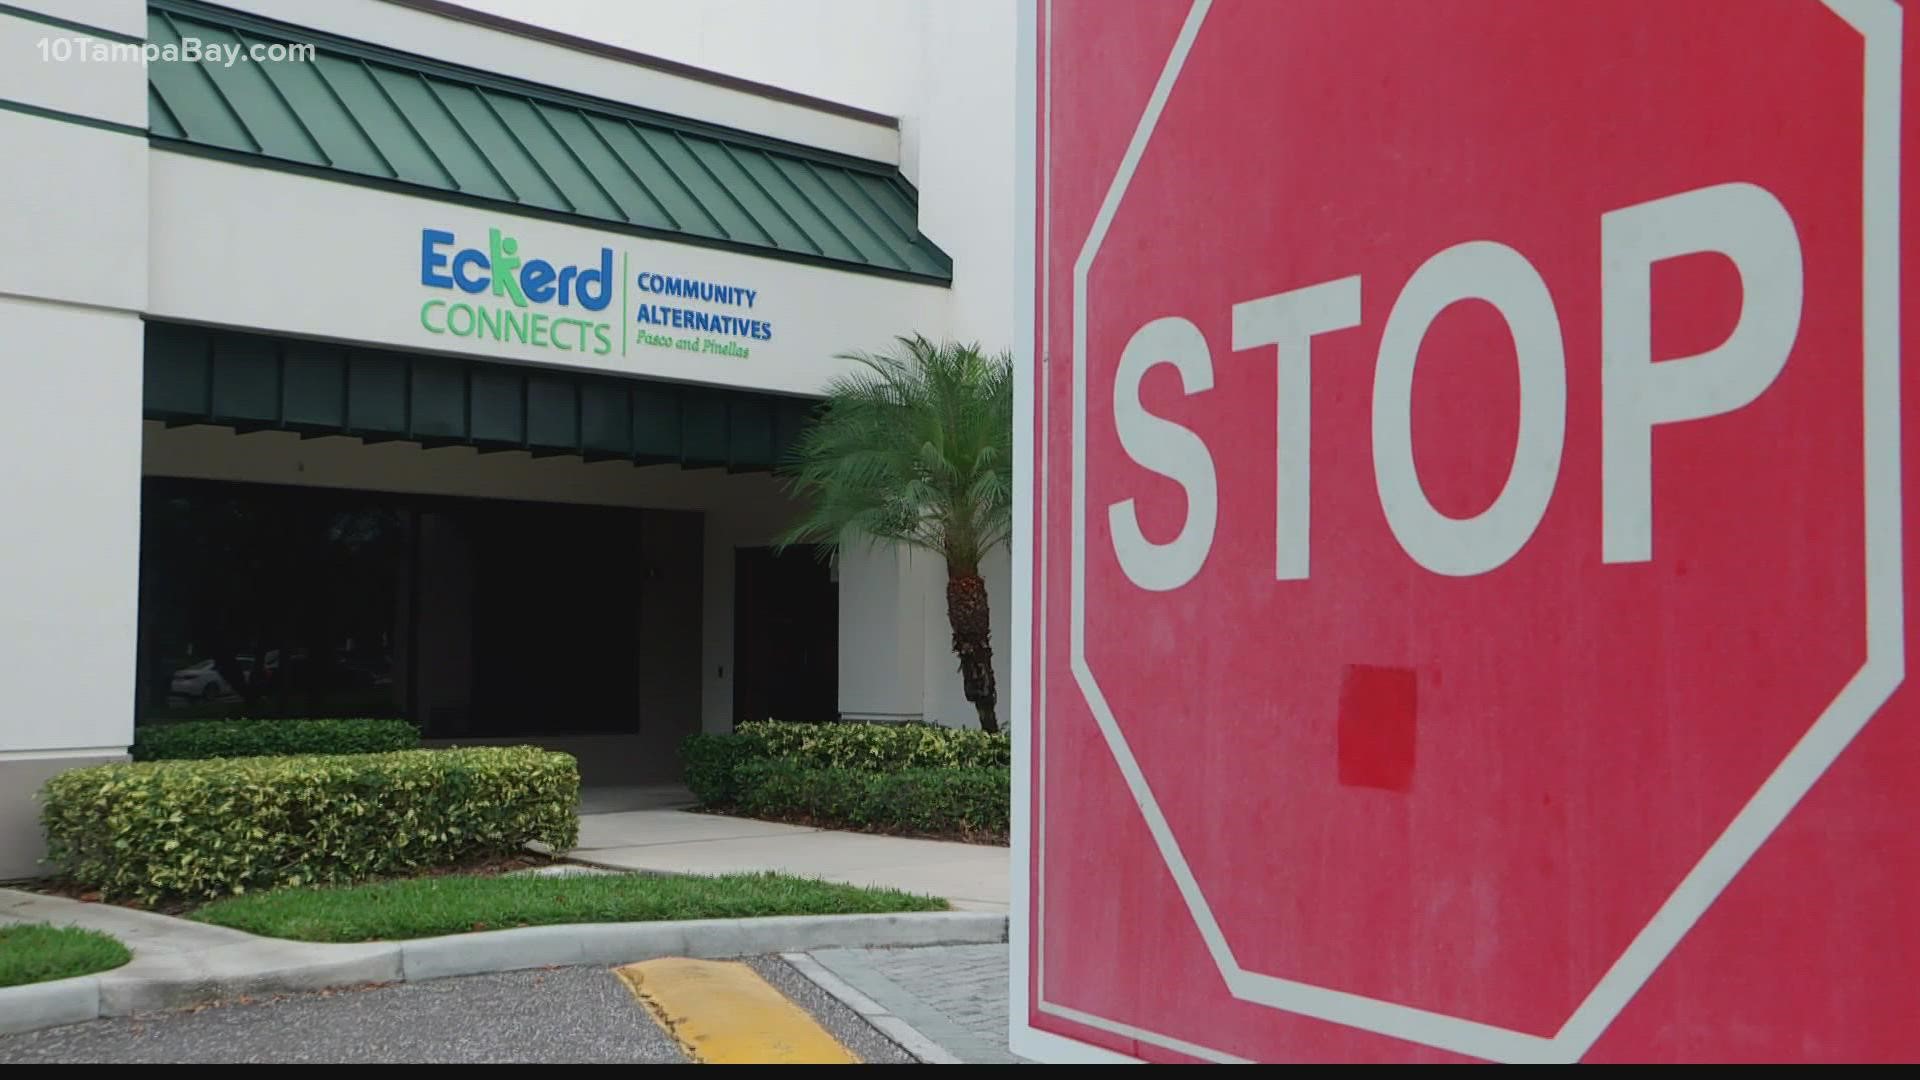 The organization has been the Tampa Bay area's lead agency for child welfare and foster care services.